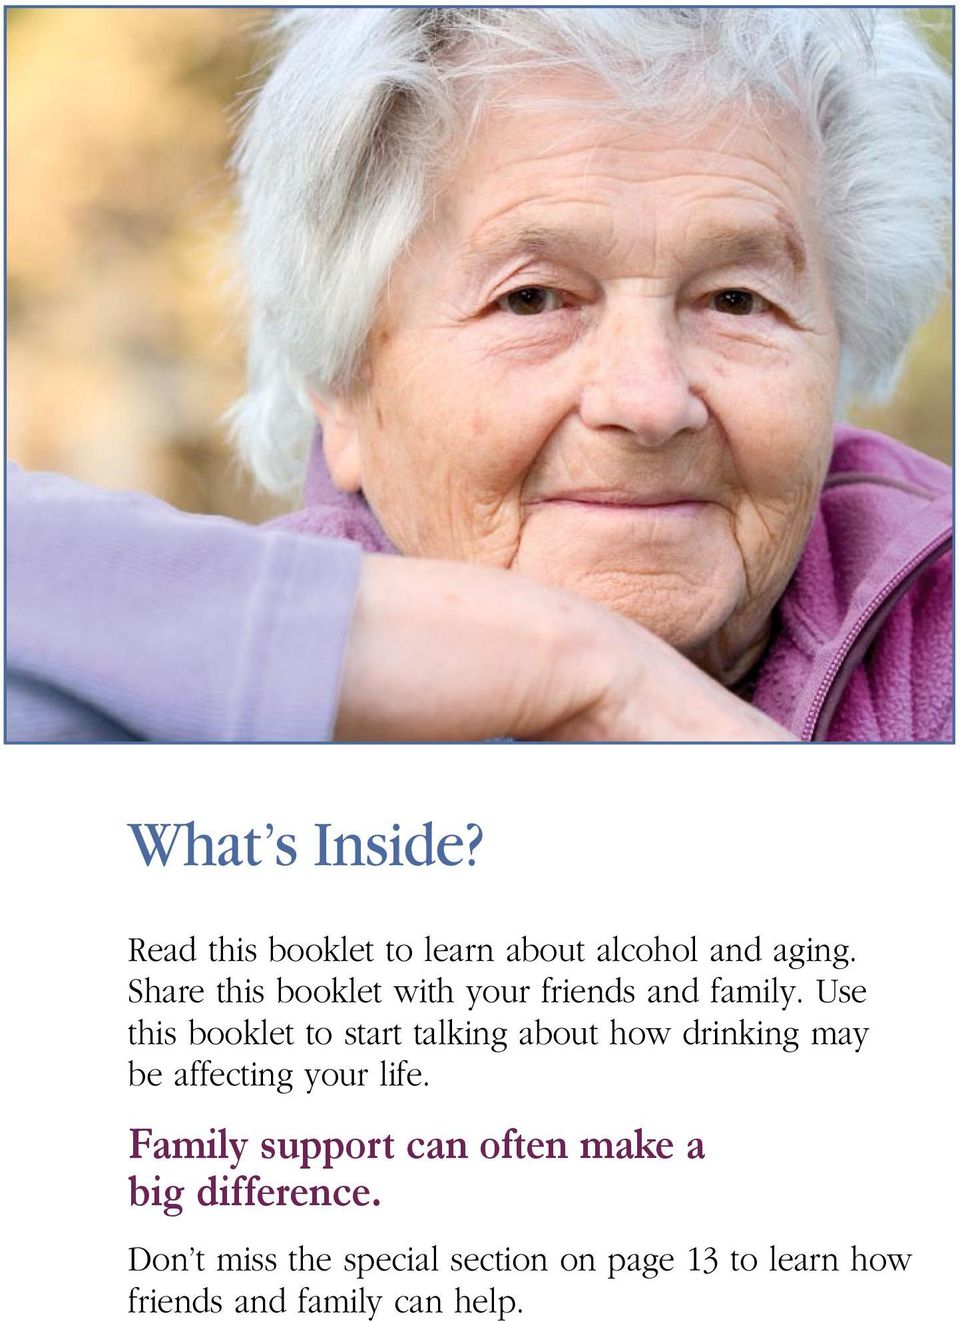 Use this booklet to start talking about how drinking may be affecting your life.